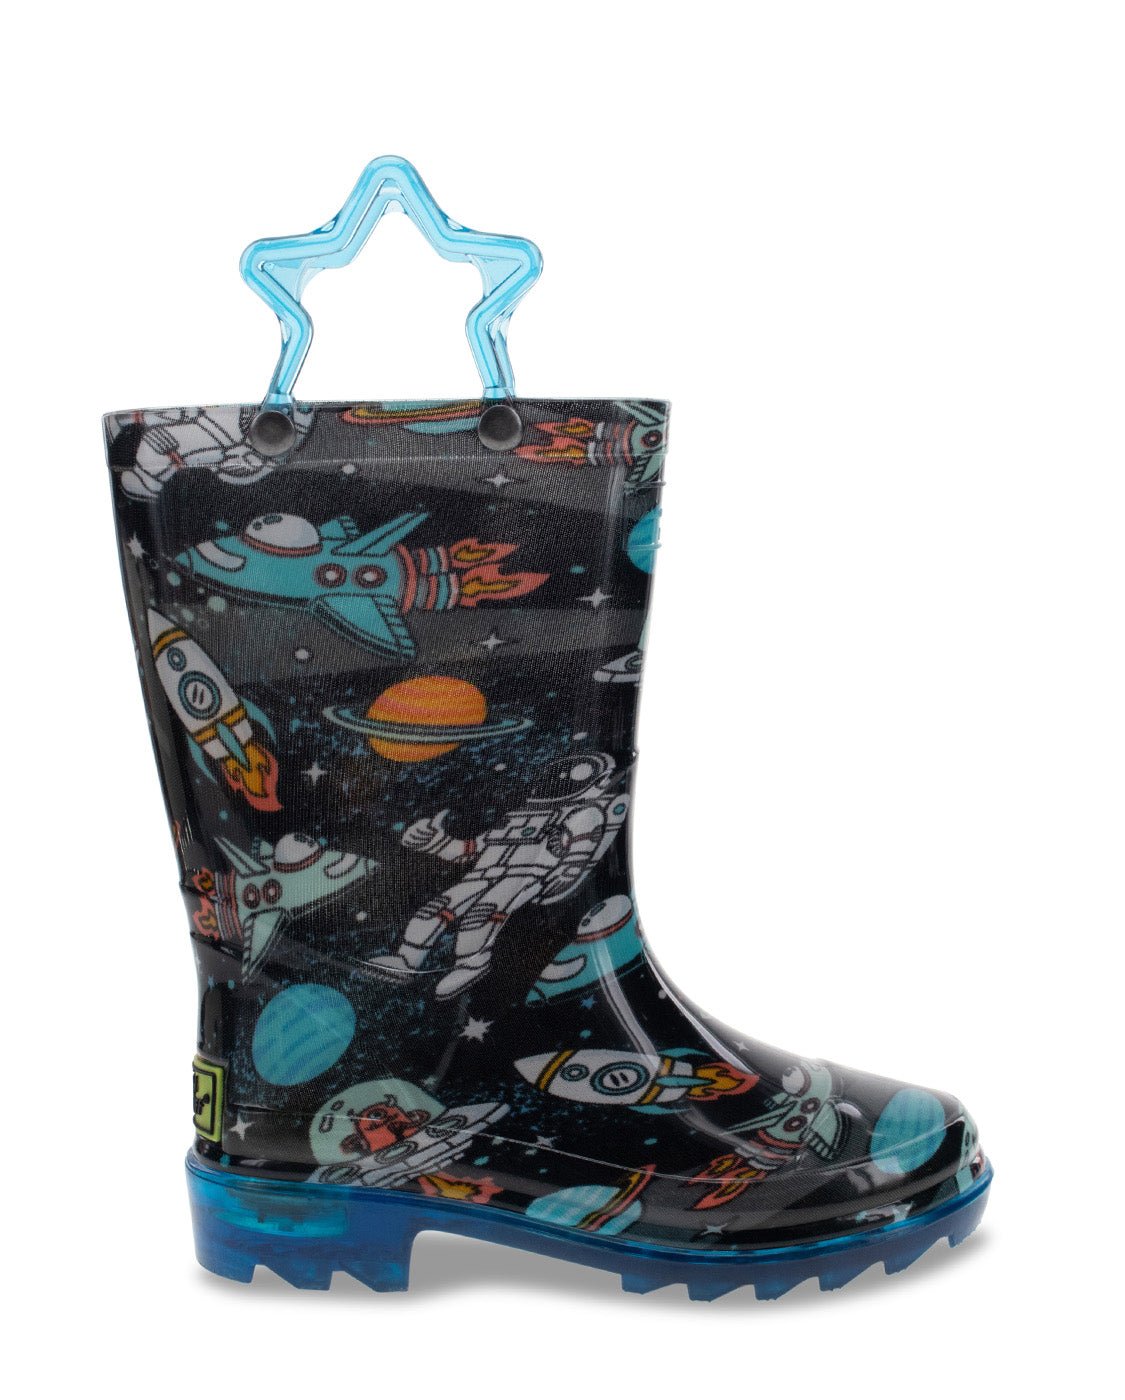 New! Kids Silly Space Lighted Rain Boot - Black